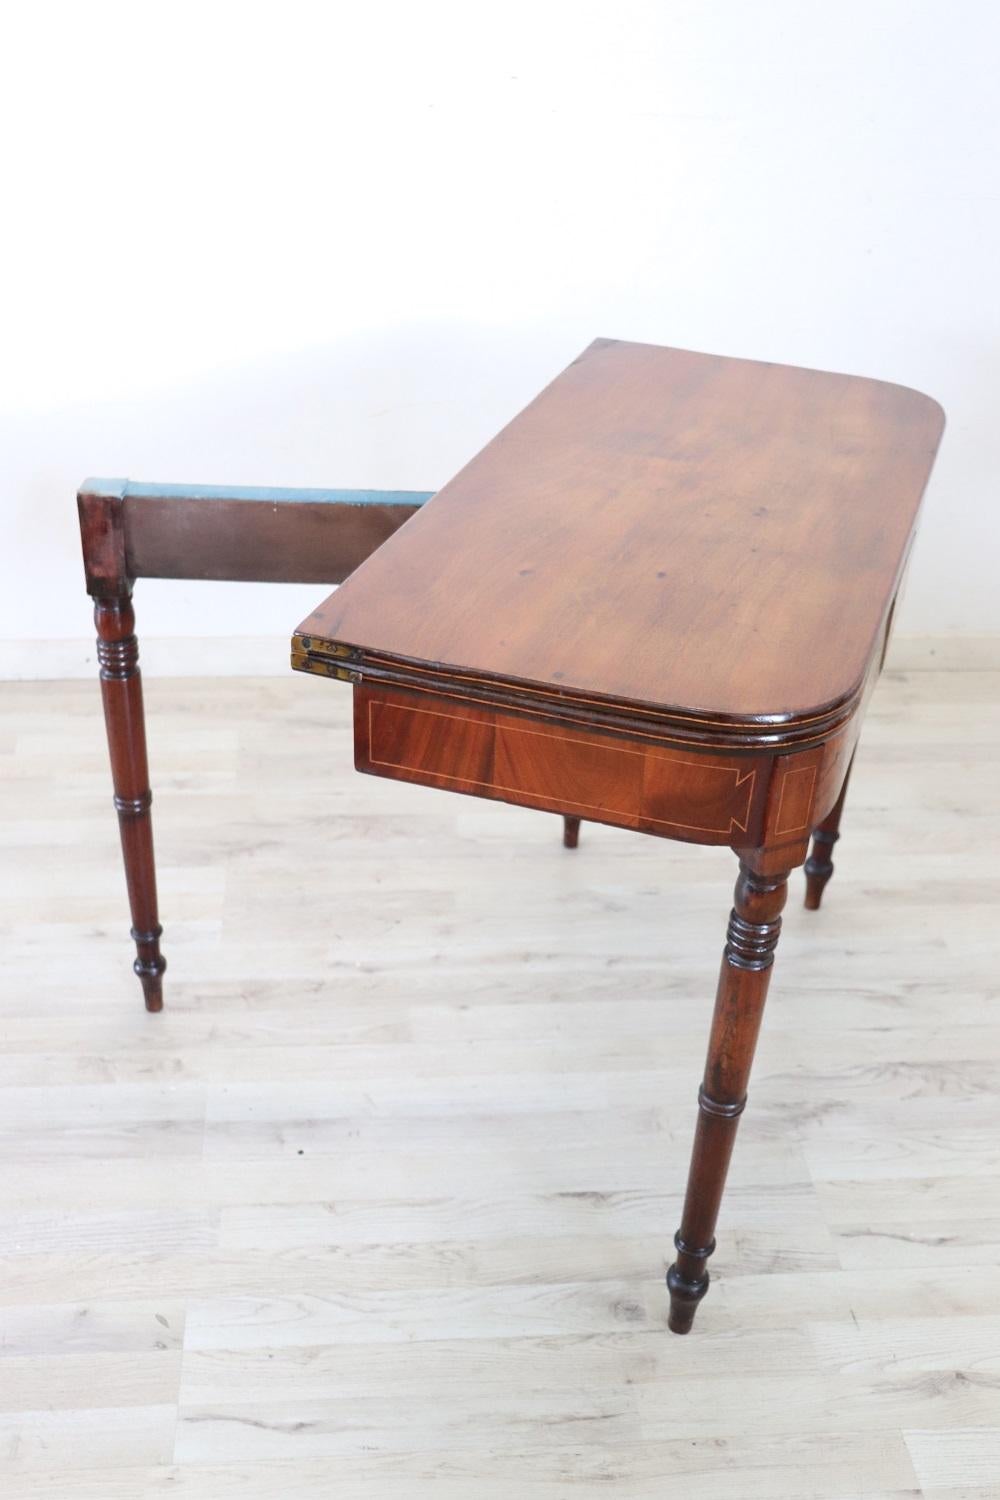 Mid-19th Century 19th Century Italian Antique Console Table in Walnut with Opening Top